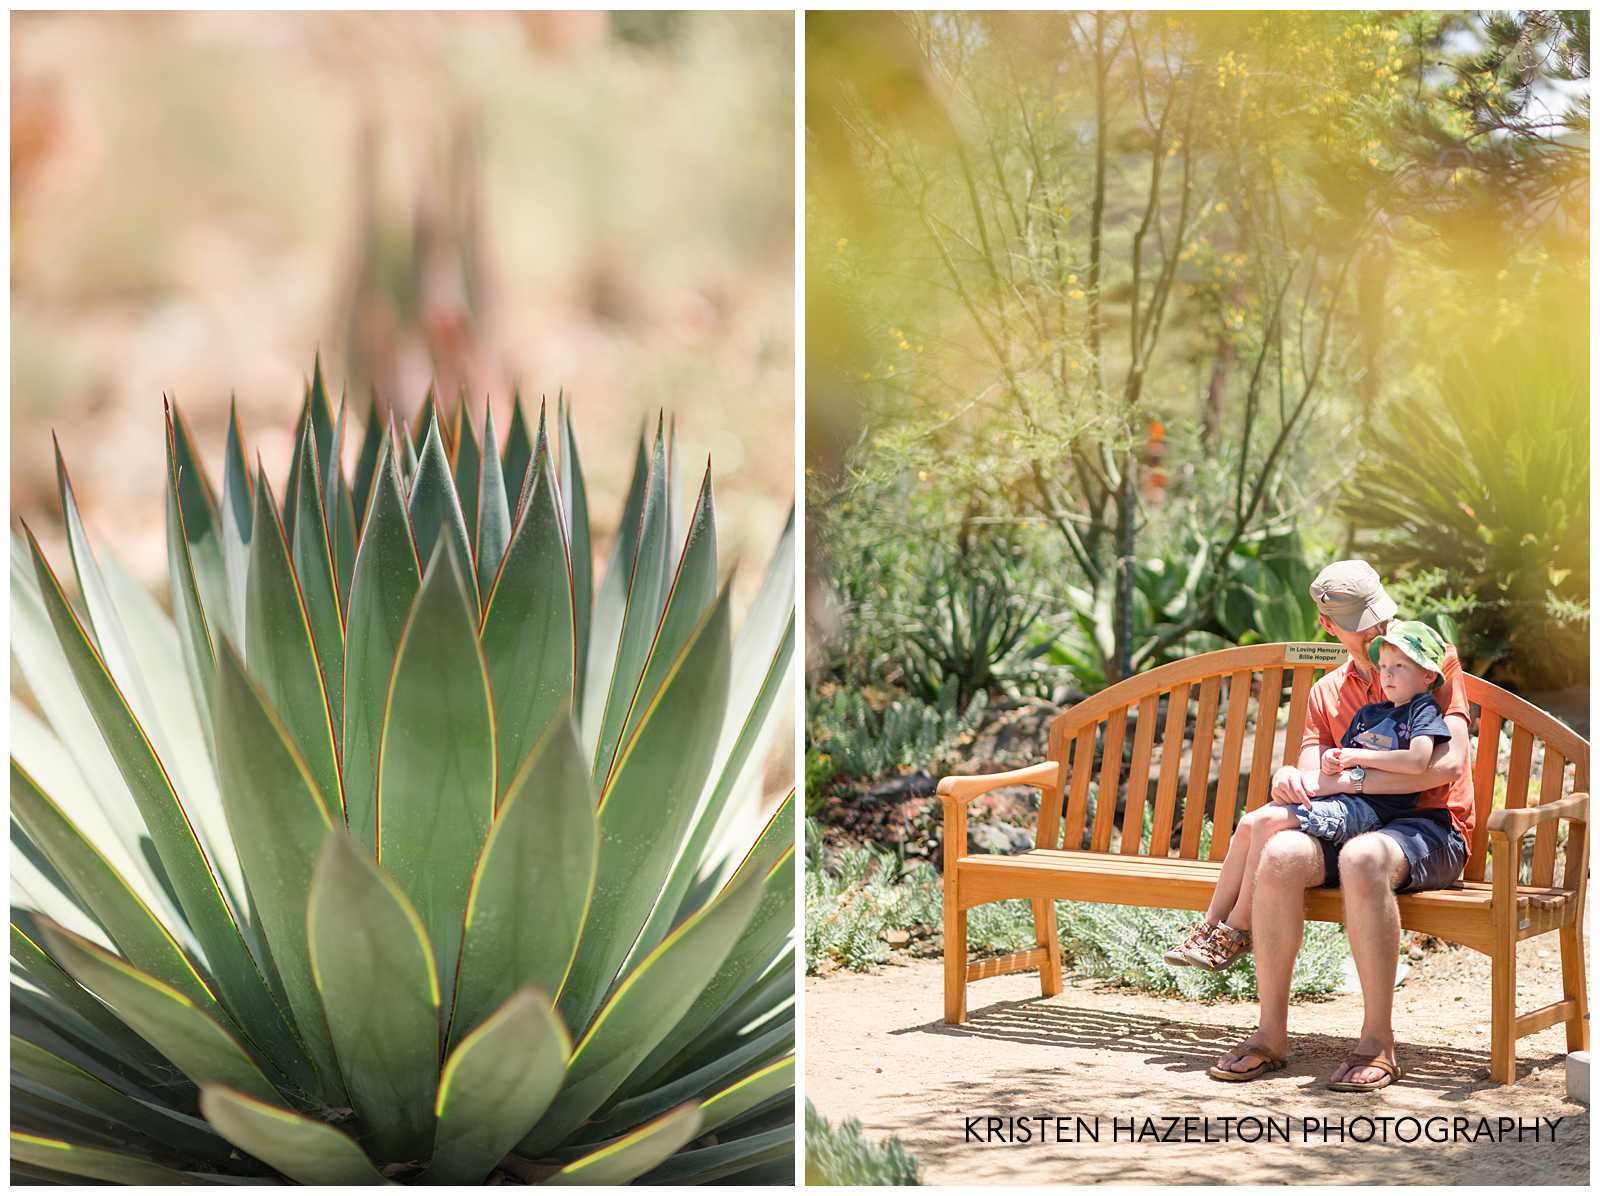 Father and son sitting on a bench in a cactus garden